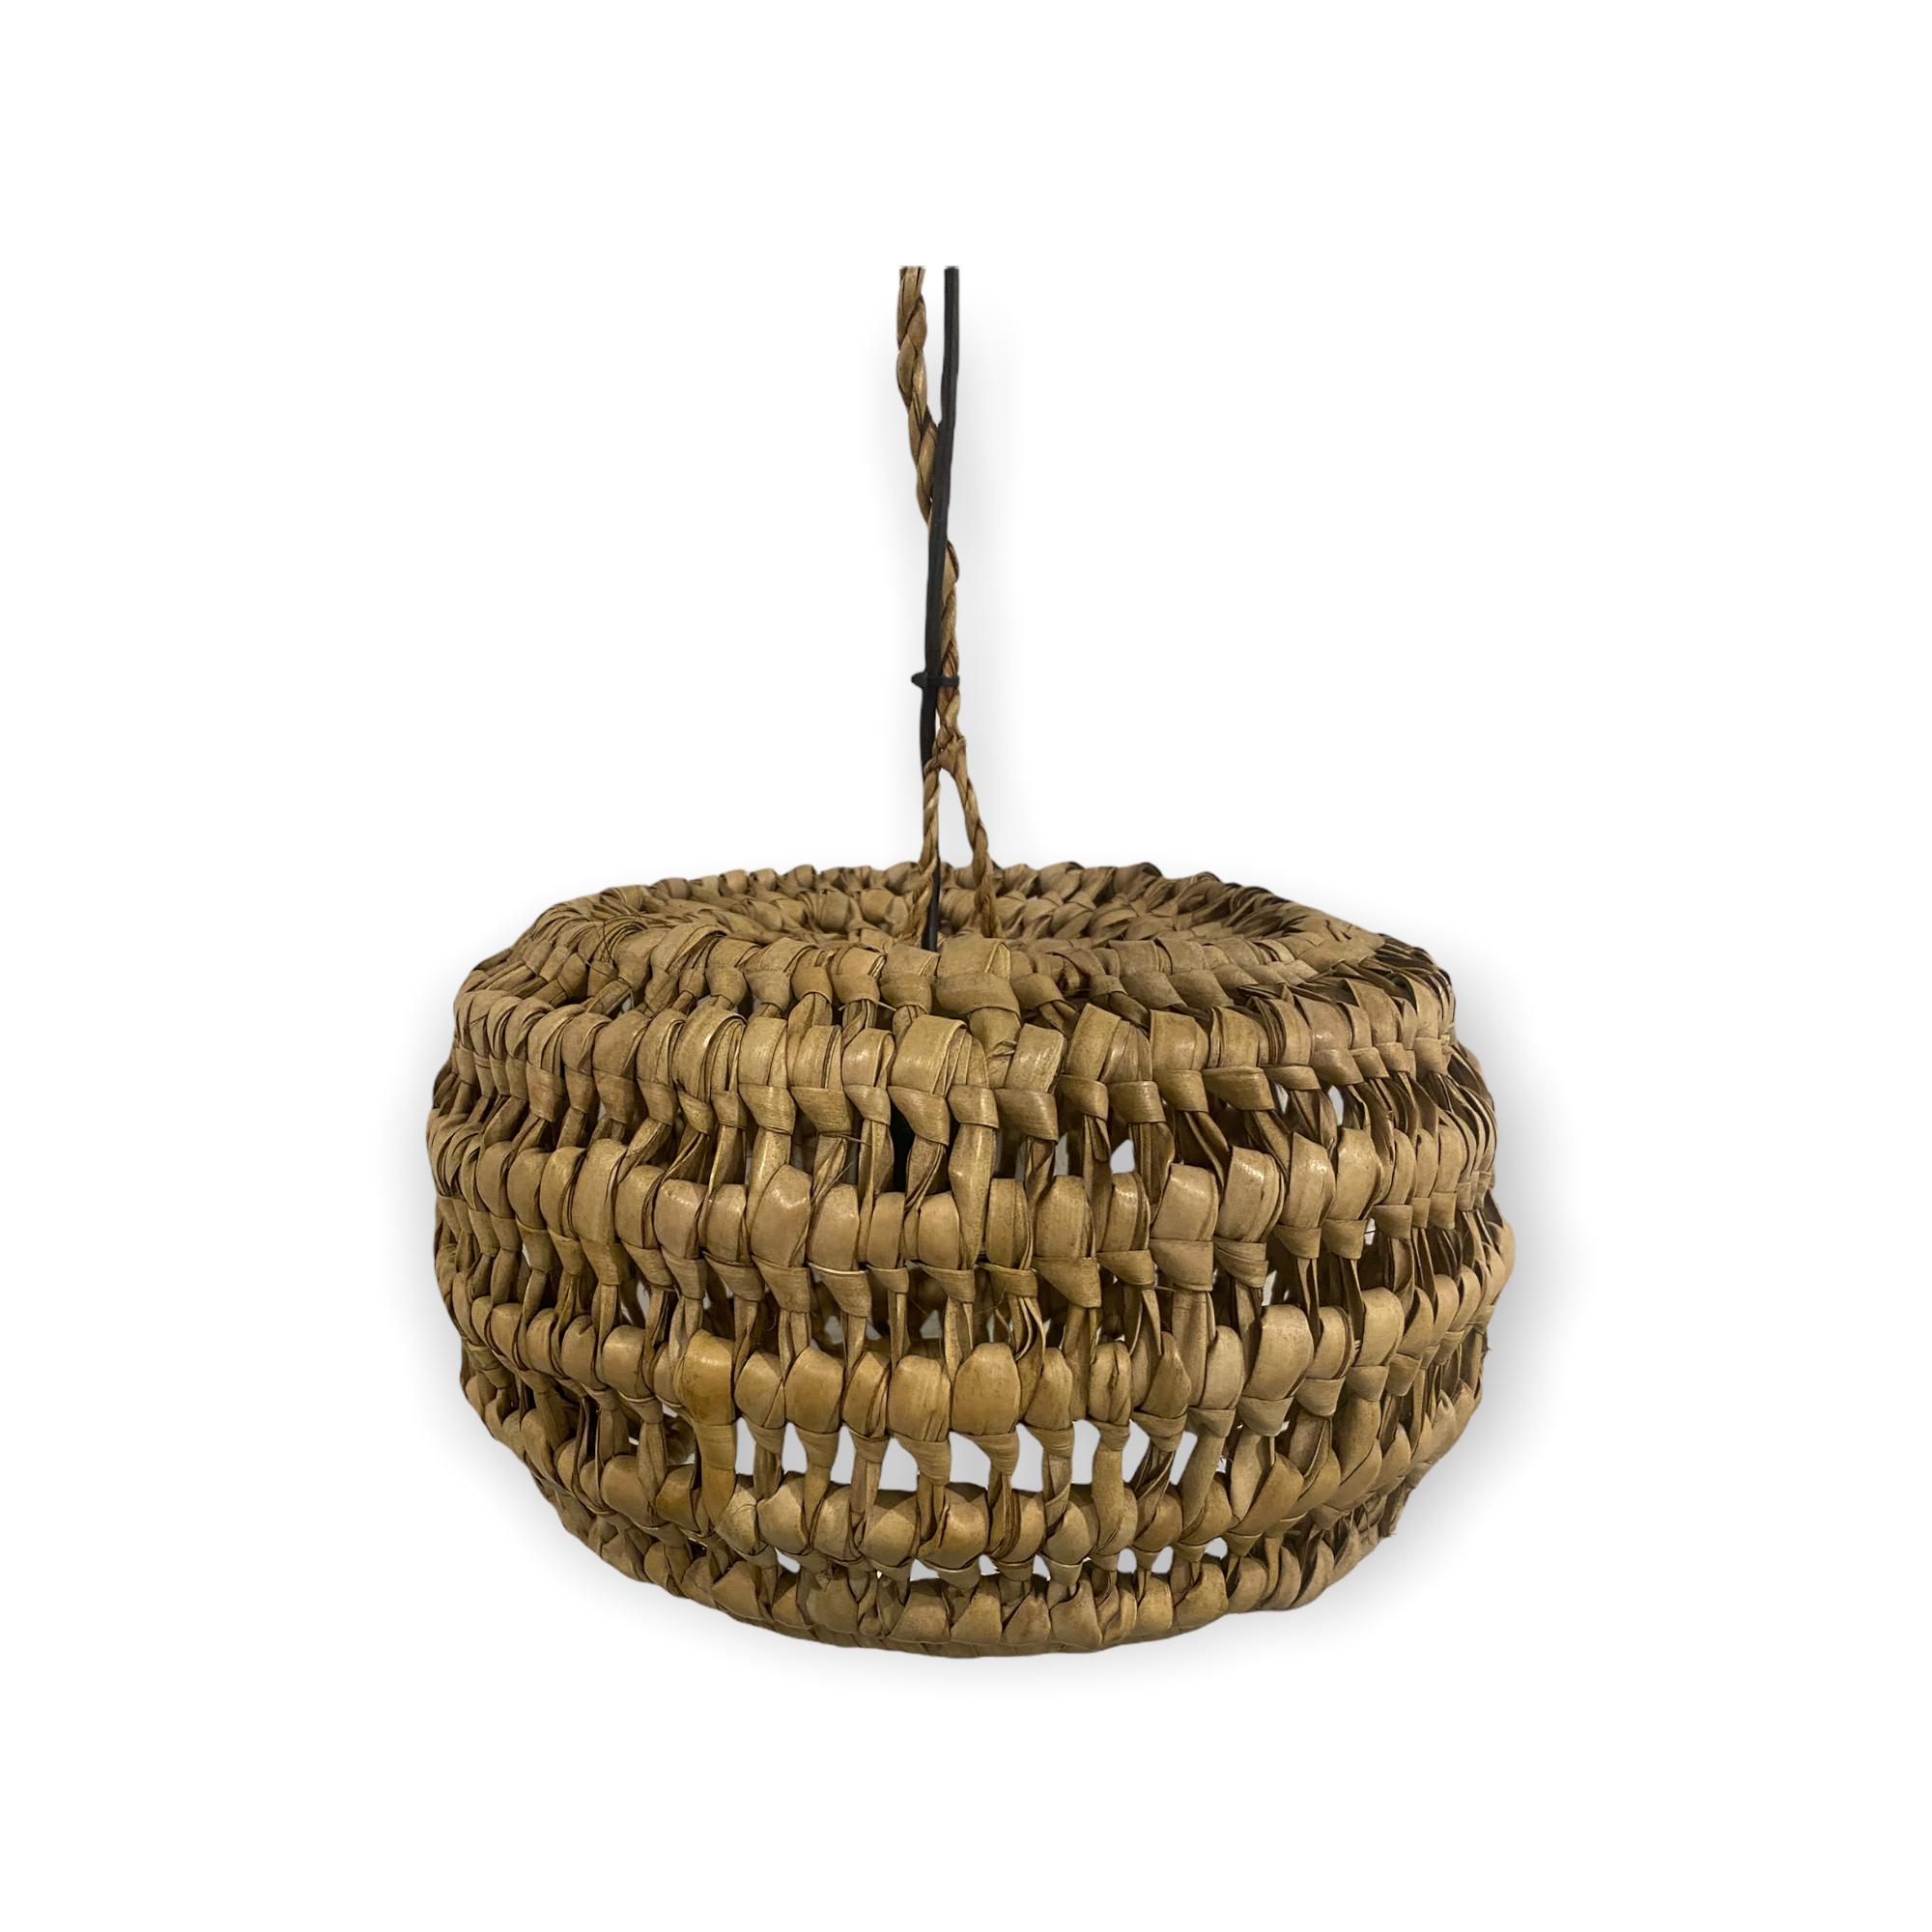 Palm leaf lamp shade- Mozambique handmade (S)